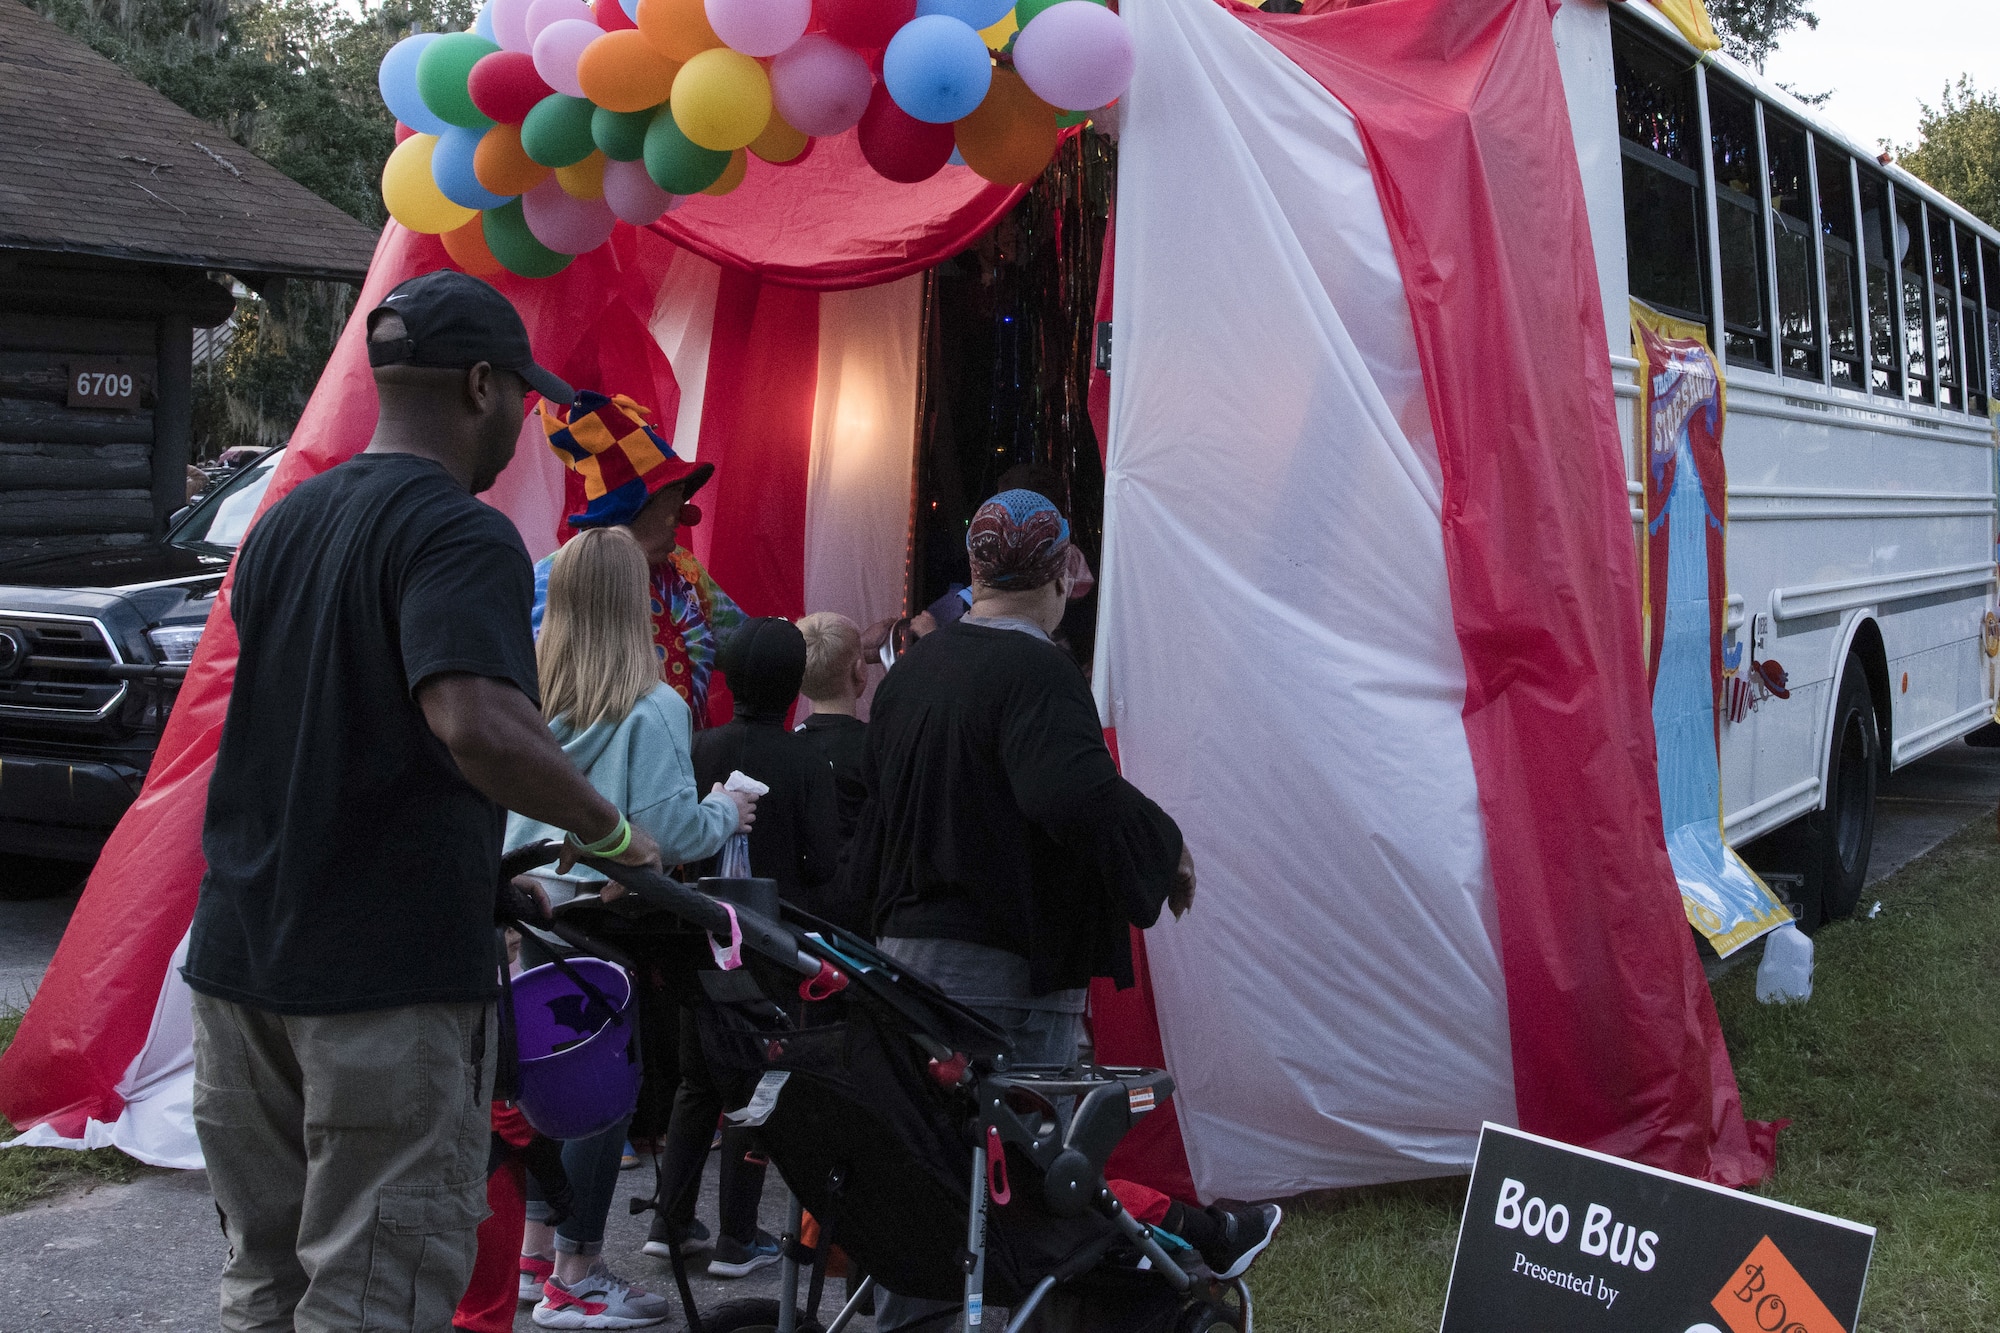 Keesler families enter the Boo Bus during Ghouls in the Park at Marina Park at Keesler Air Force Base, Mississippi, Oct. 26, 2018. The Halloween event also featured a haunted house and various games for children of all ages. (U.S. Air Force photo by Airman 1st Class Suzie Plotnikov)